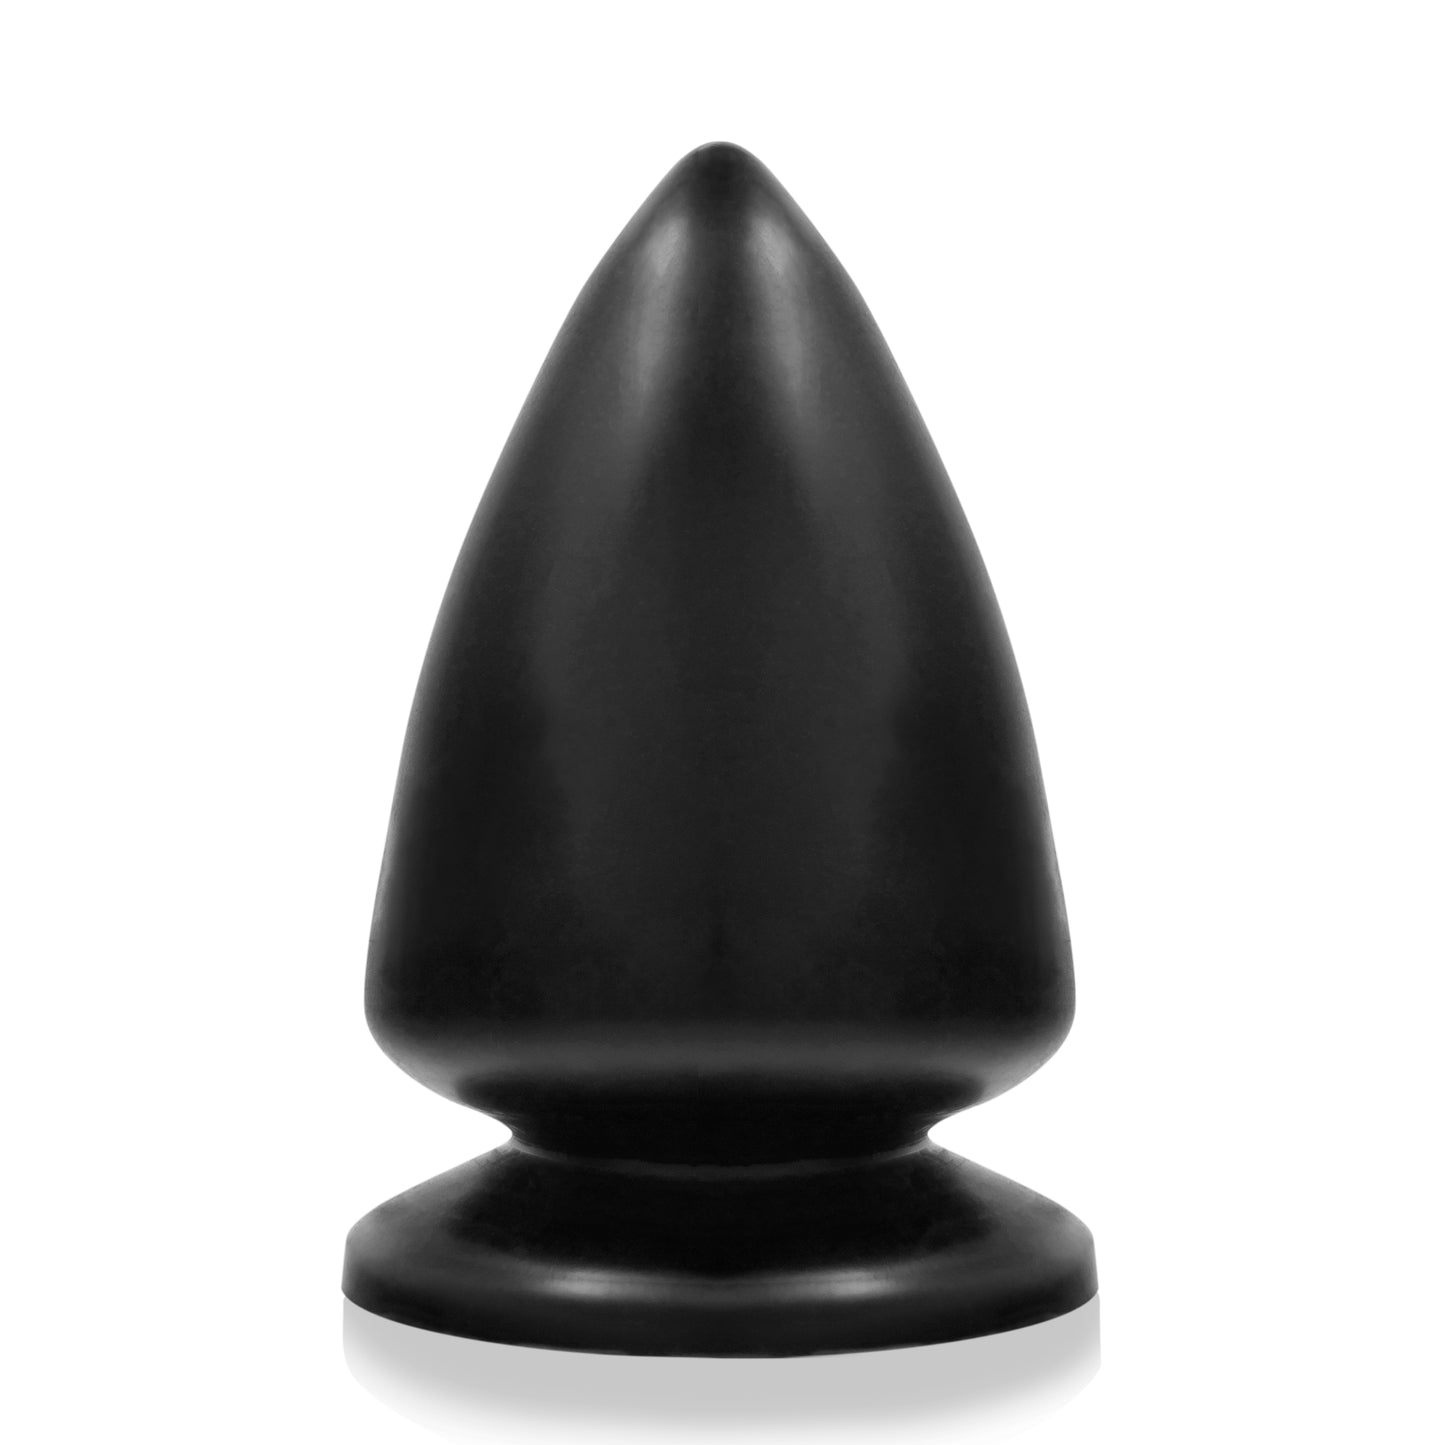 Butt Plug XX Large Black - Just for you desires